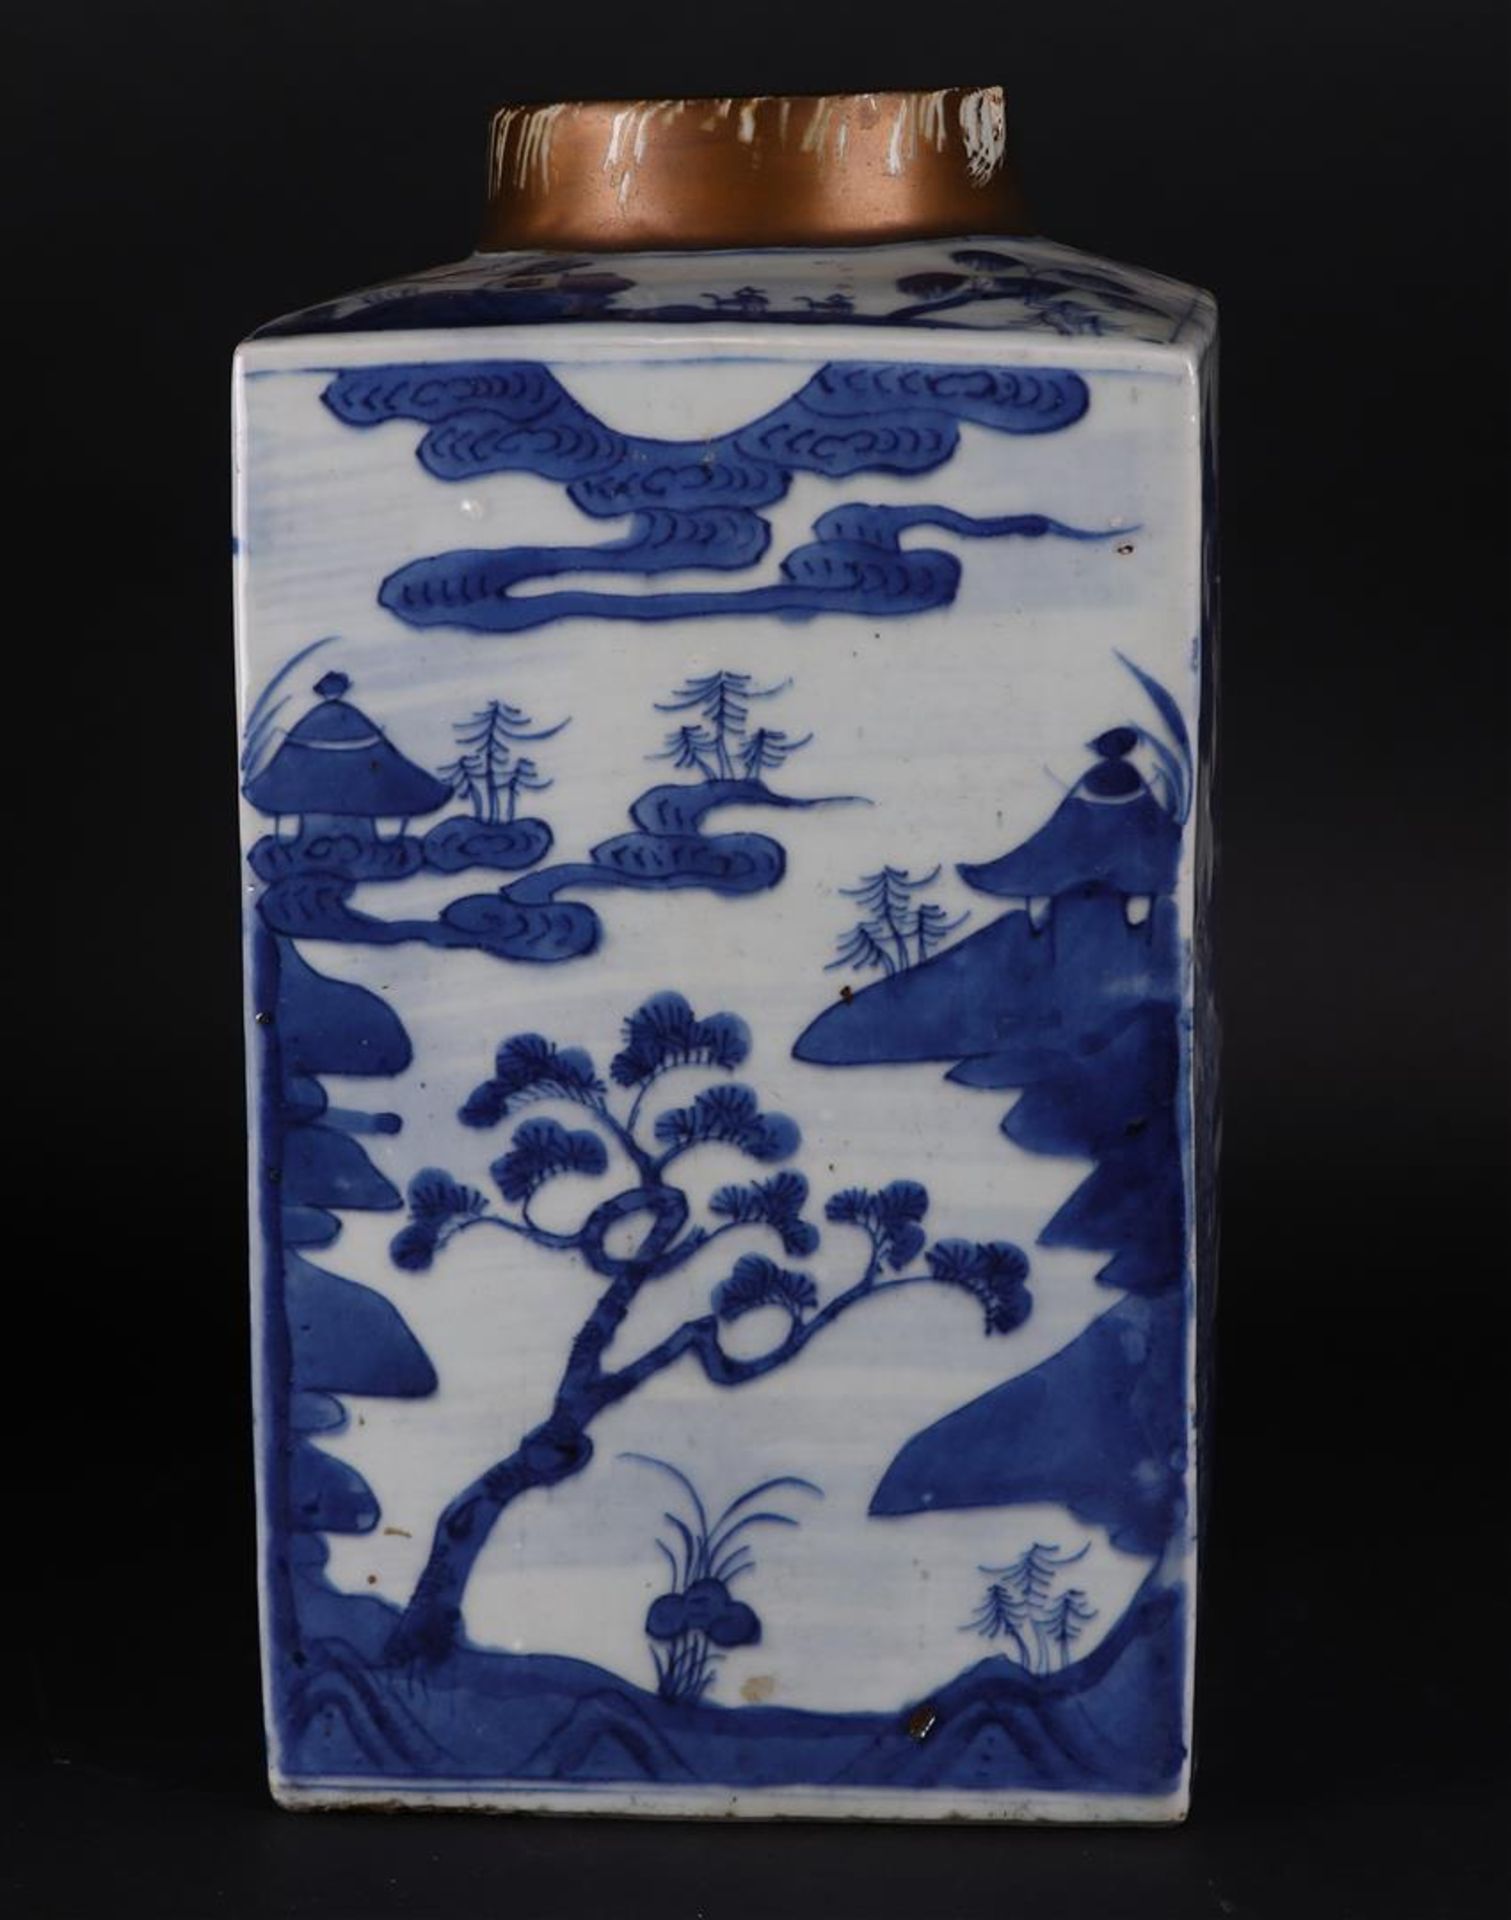 A square porcelain storage jar decorated with various landscapes. China, 19th century. - Image 2 of 6